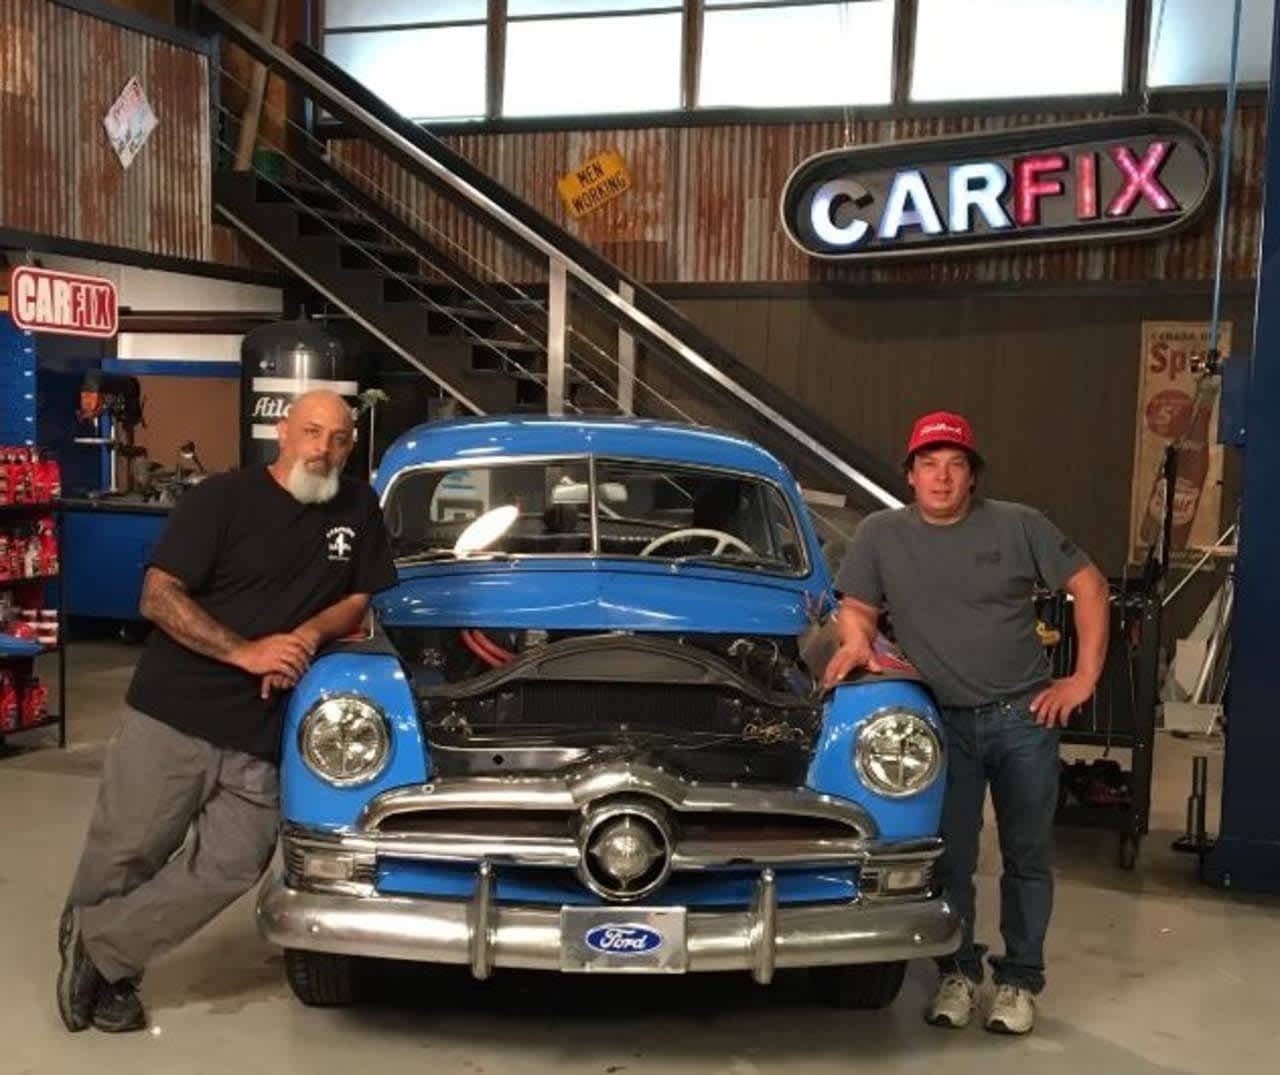 Chuck Wanamaker III, right, with his 1950 Ford Coupe, and co-host Lou Santiago on the set of "Car Fix" in Florida.